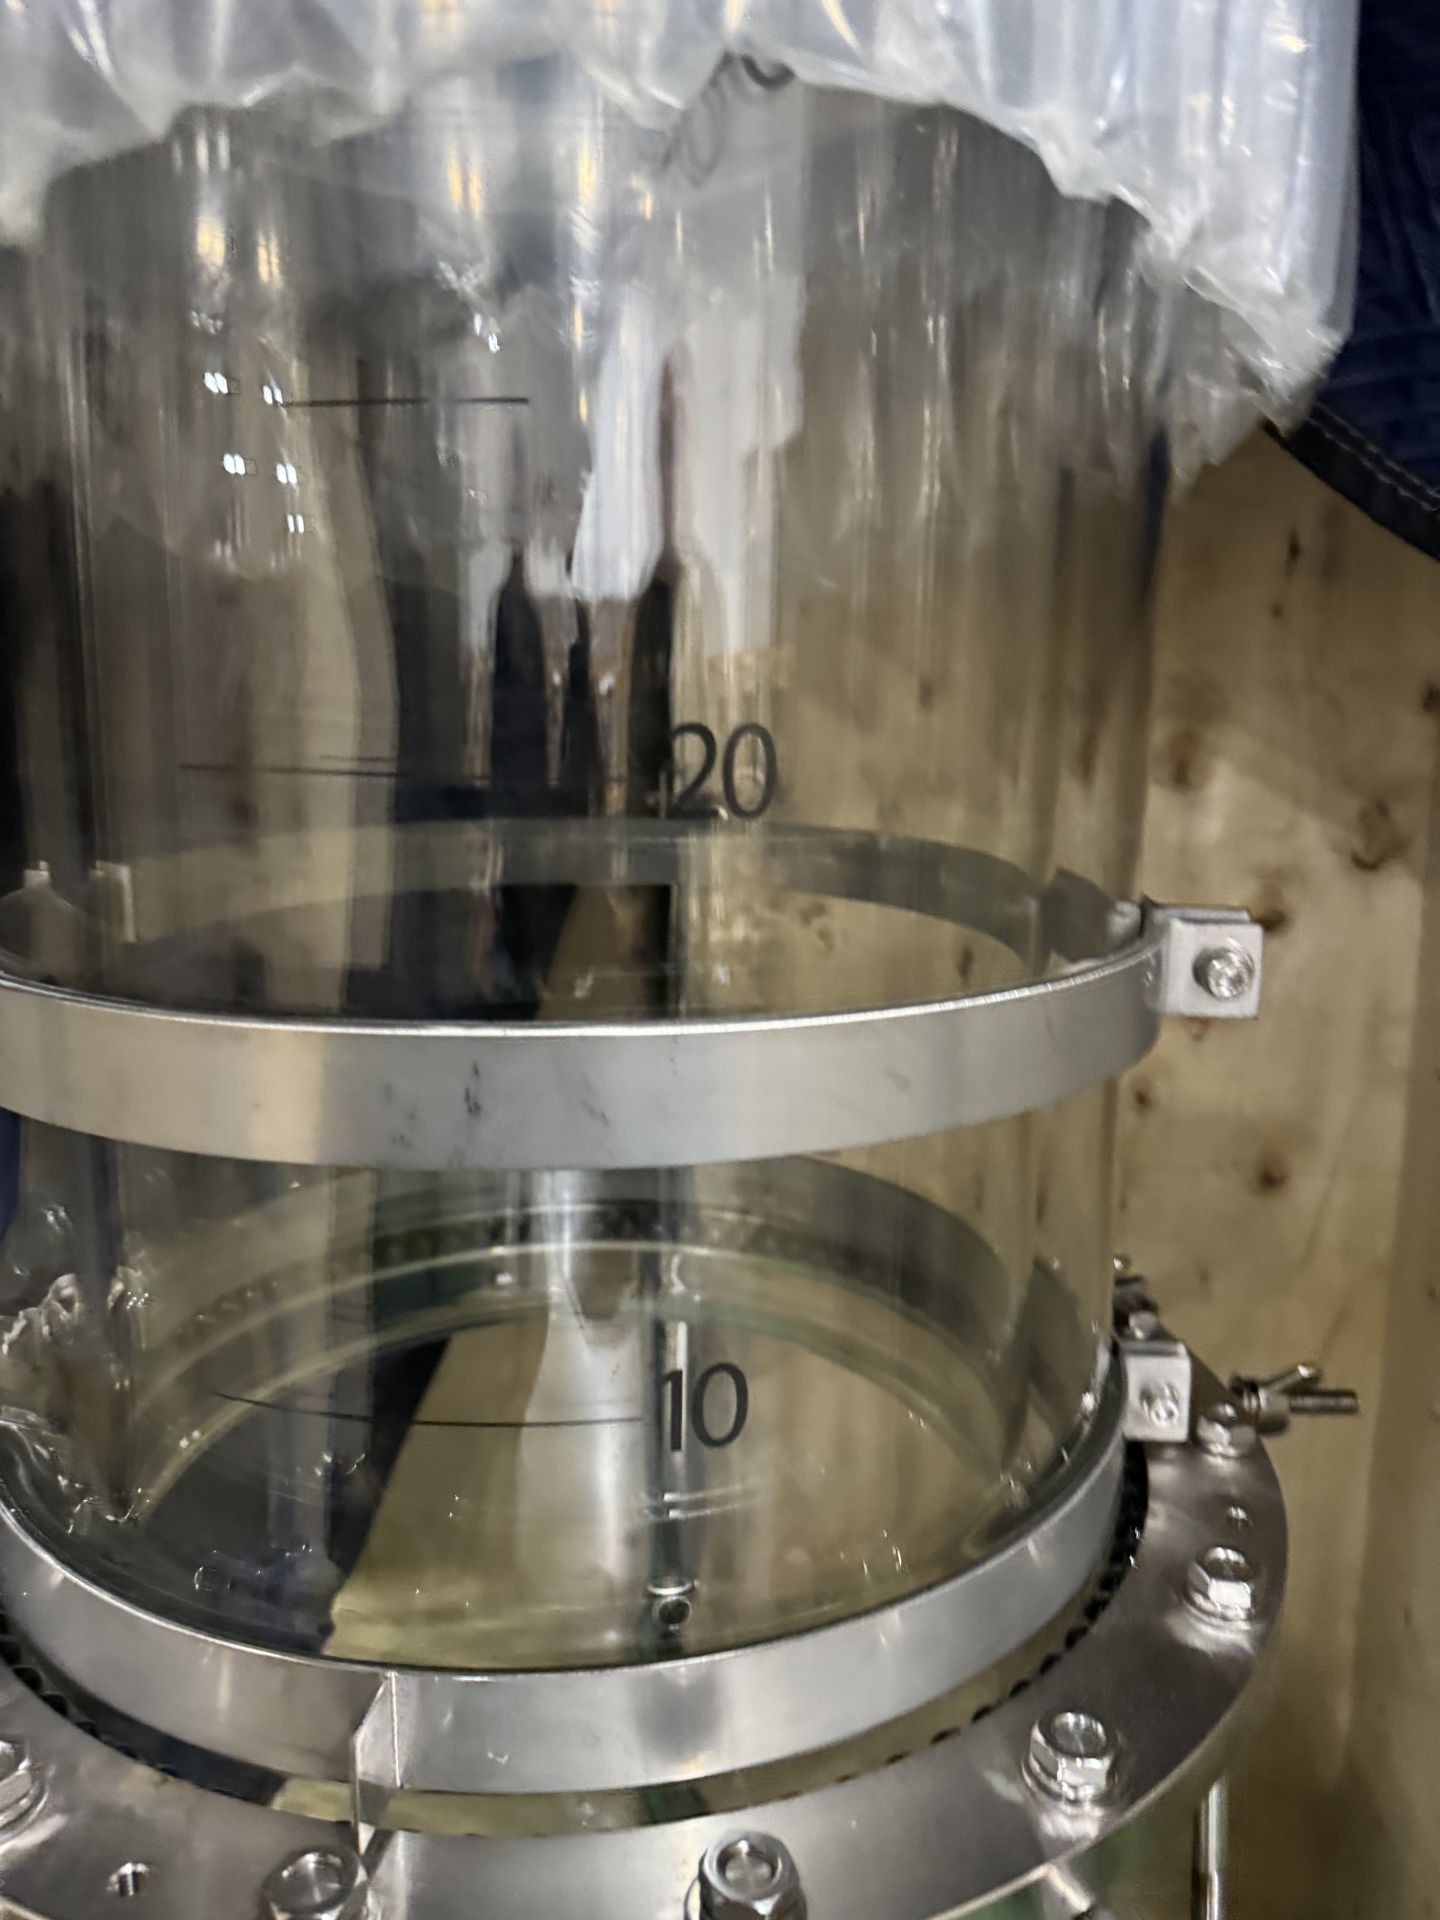 New/Unused 50 L Glass Filter Reactor System. Model CDR-50. - Image 5 of 6